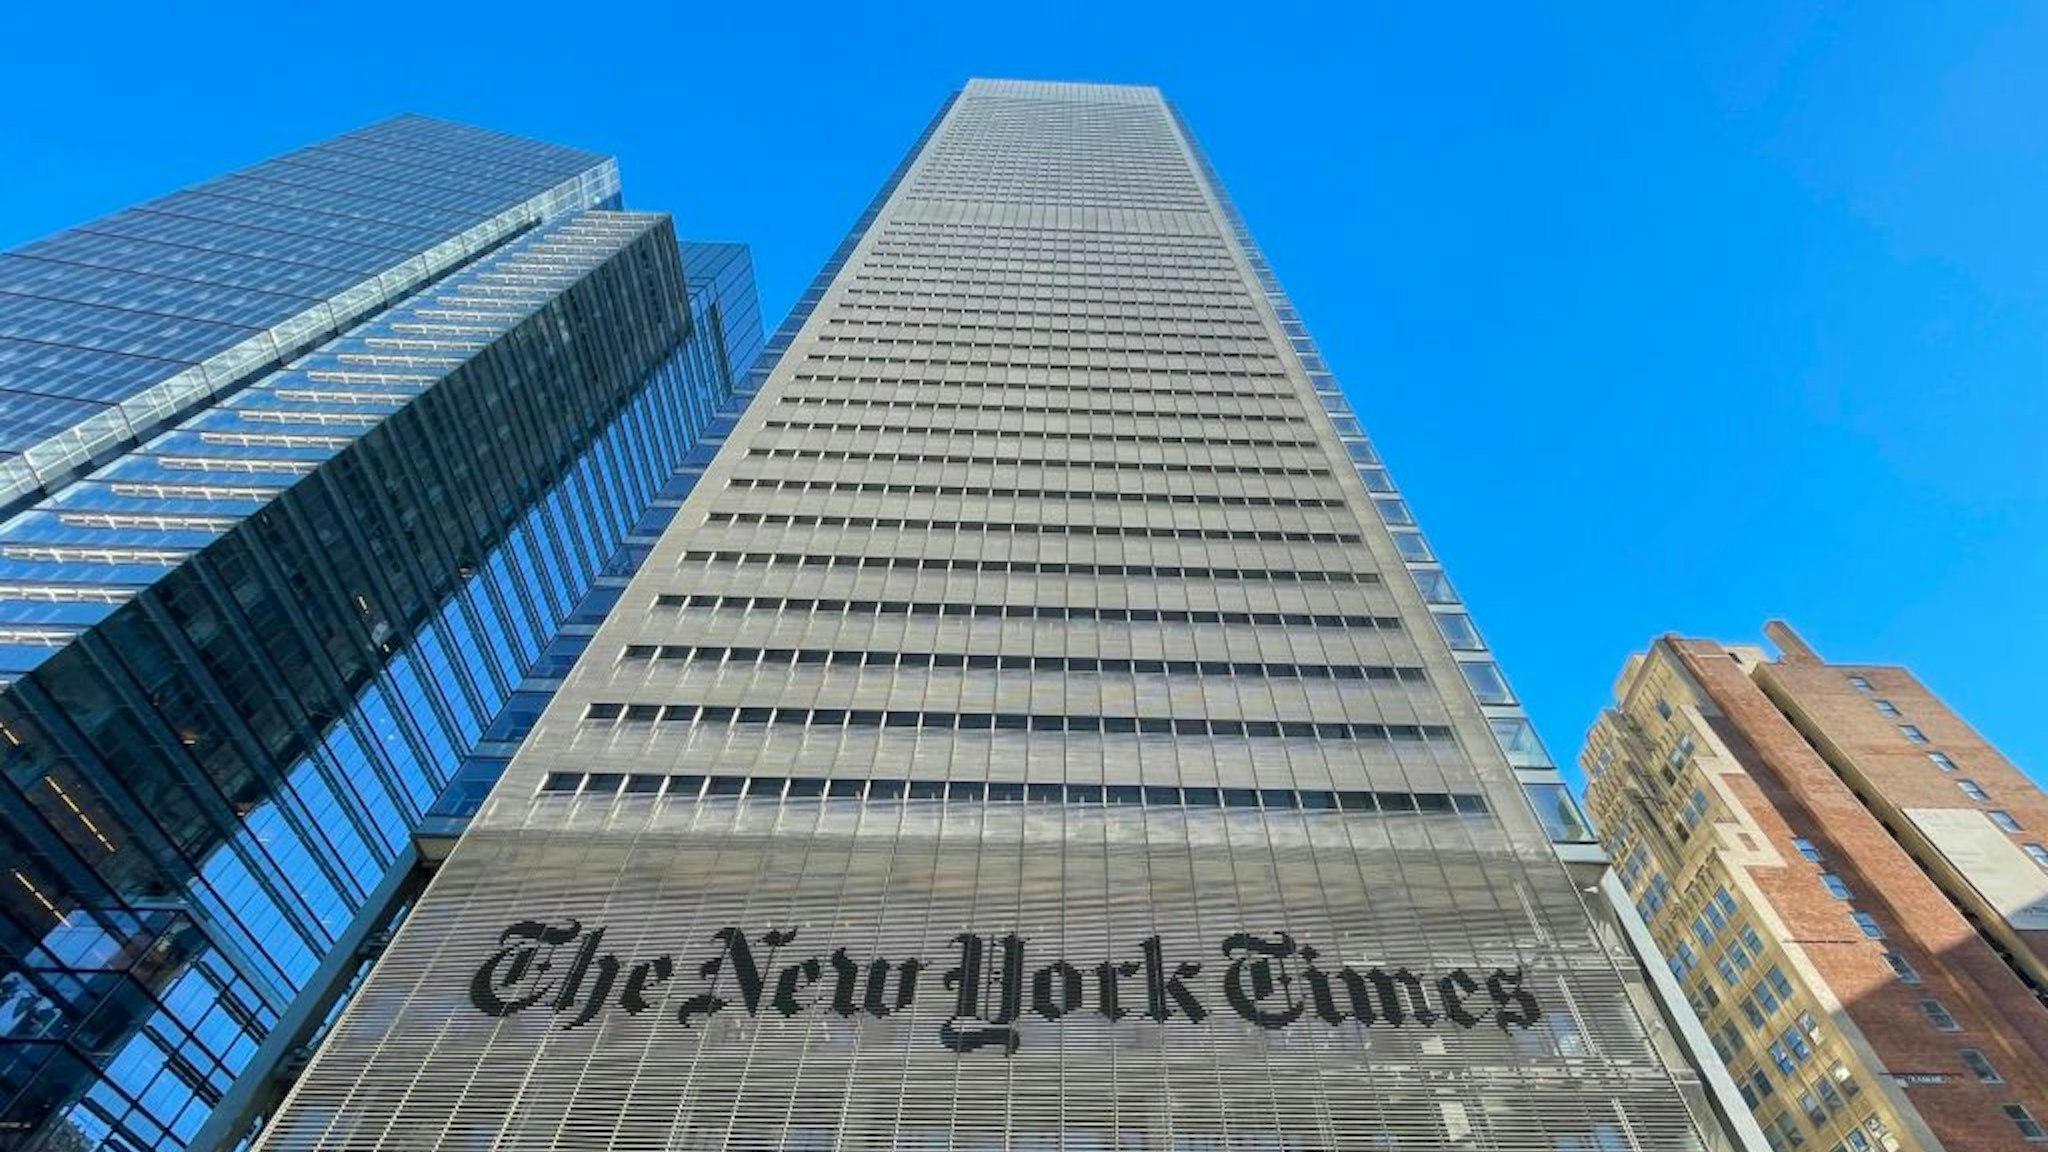 The New York Times Building is seen in New York City on February 4, 2021.